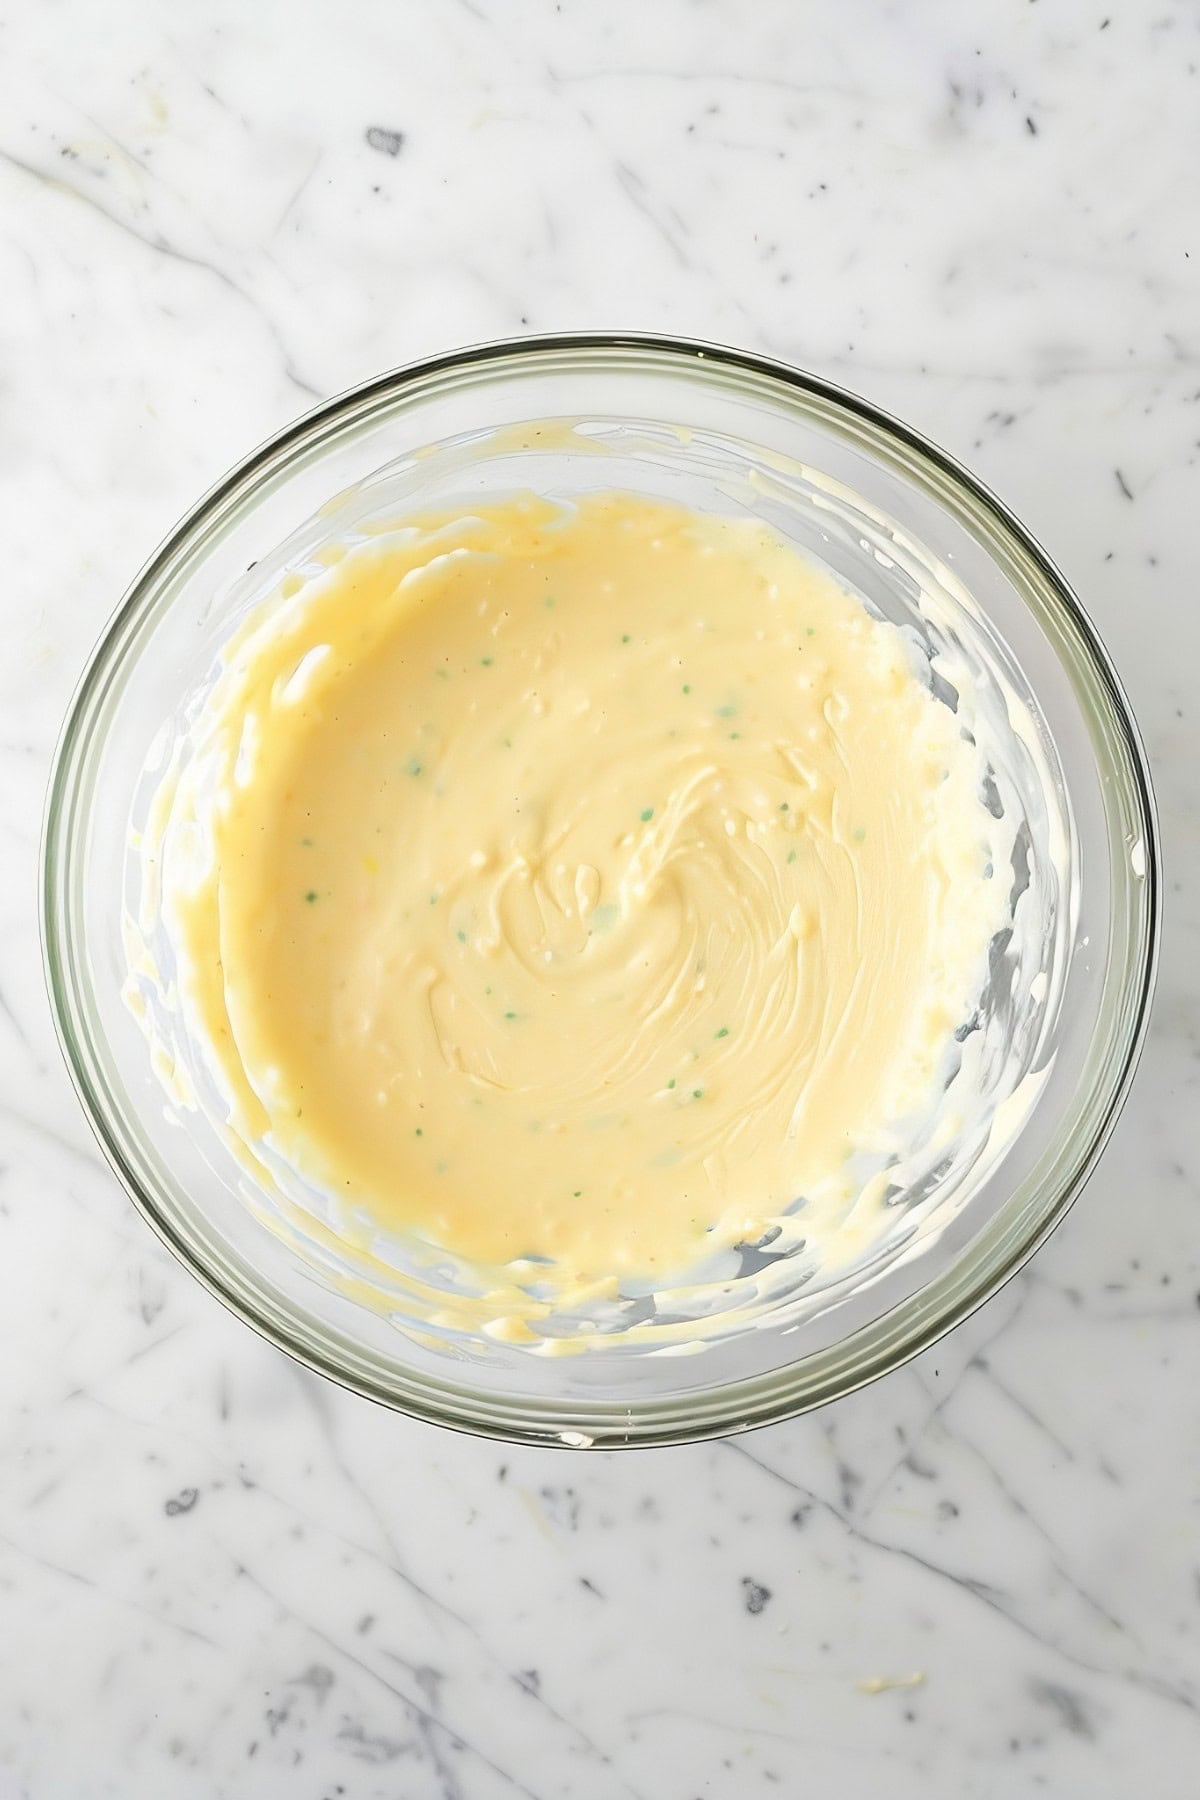 Creamy filling mixture of cream cheese, sweetened condensed milk, key lime juice and zest